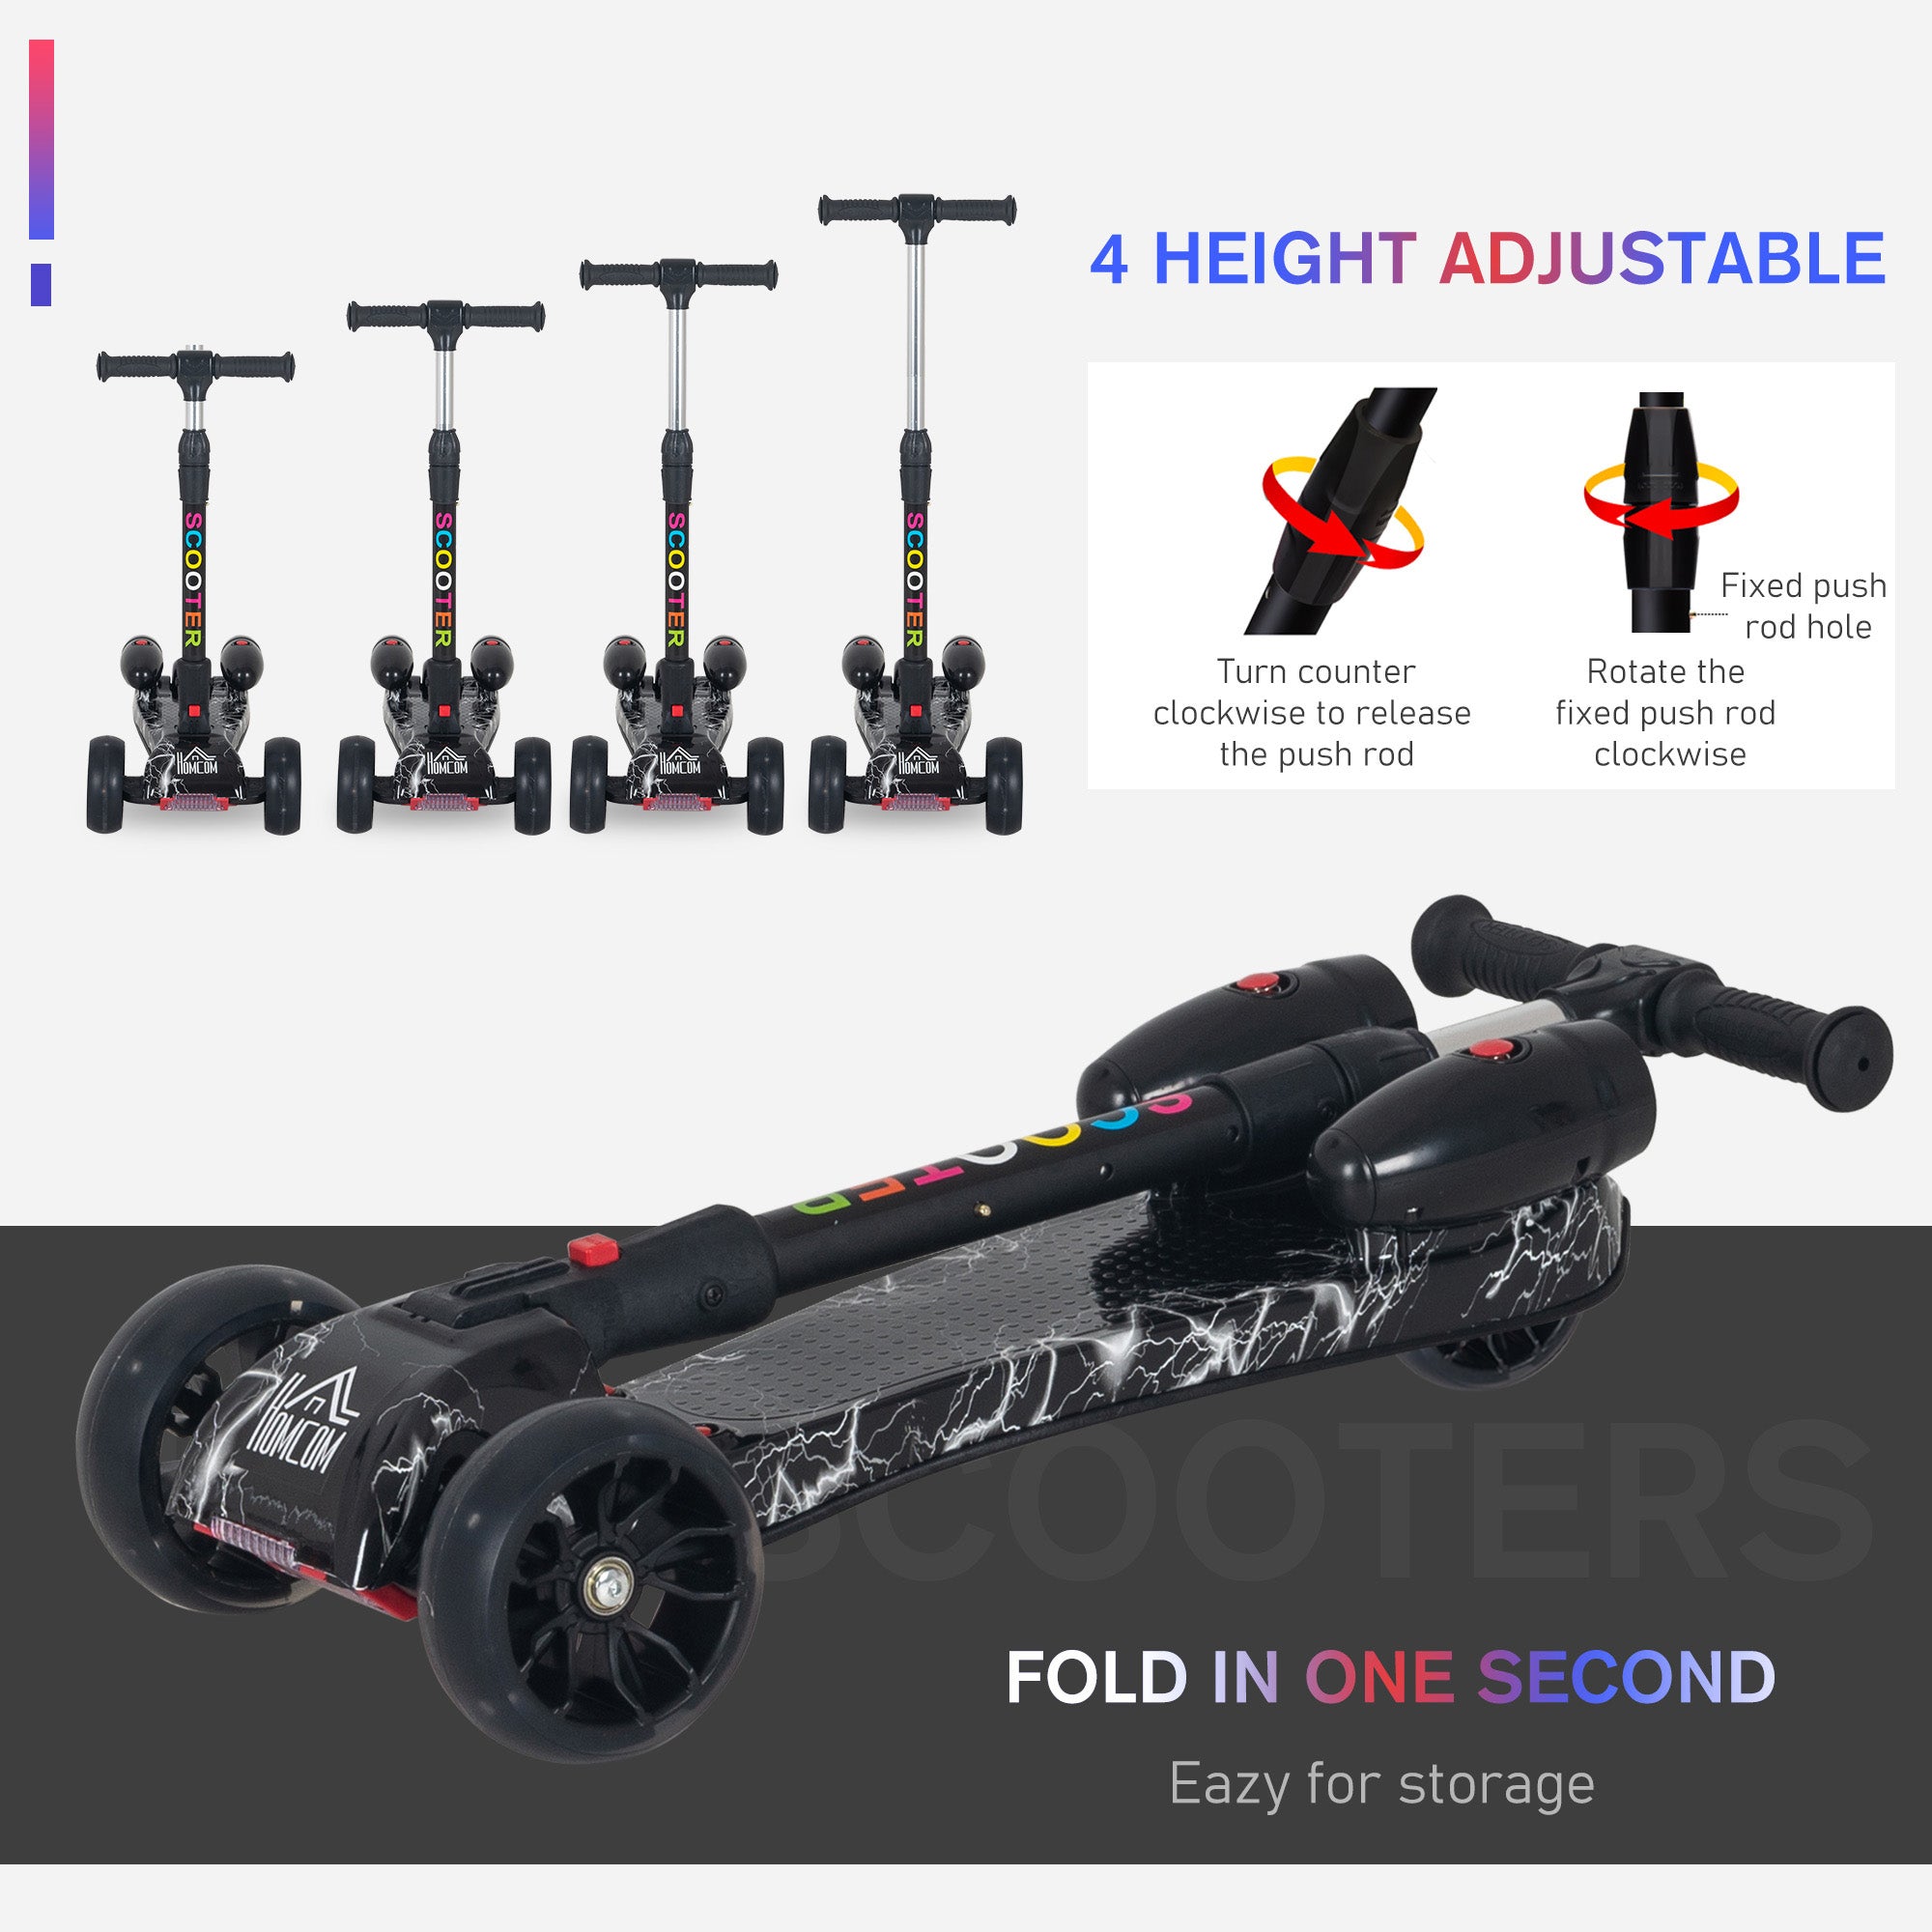 HOMCOM Kids 3 Wheel Scooter Adjustable Height w/ Flashing Wheels Music Water Spray Foldable Design Cool On Off Road Vehicle Black - Inspirely